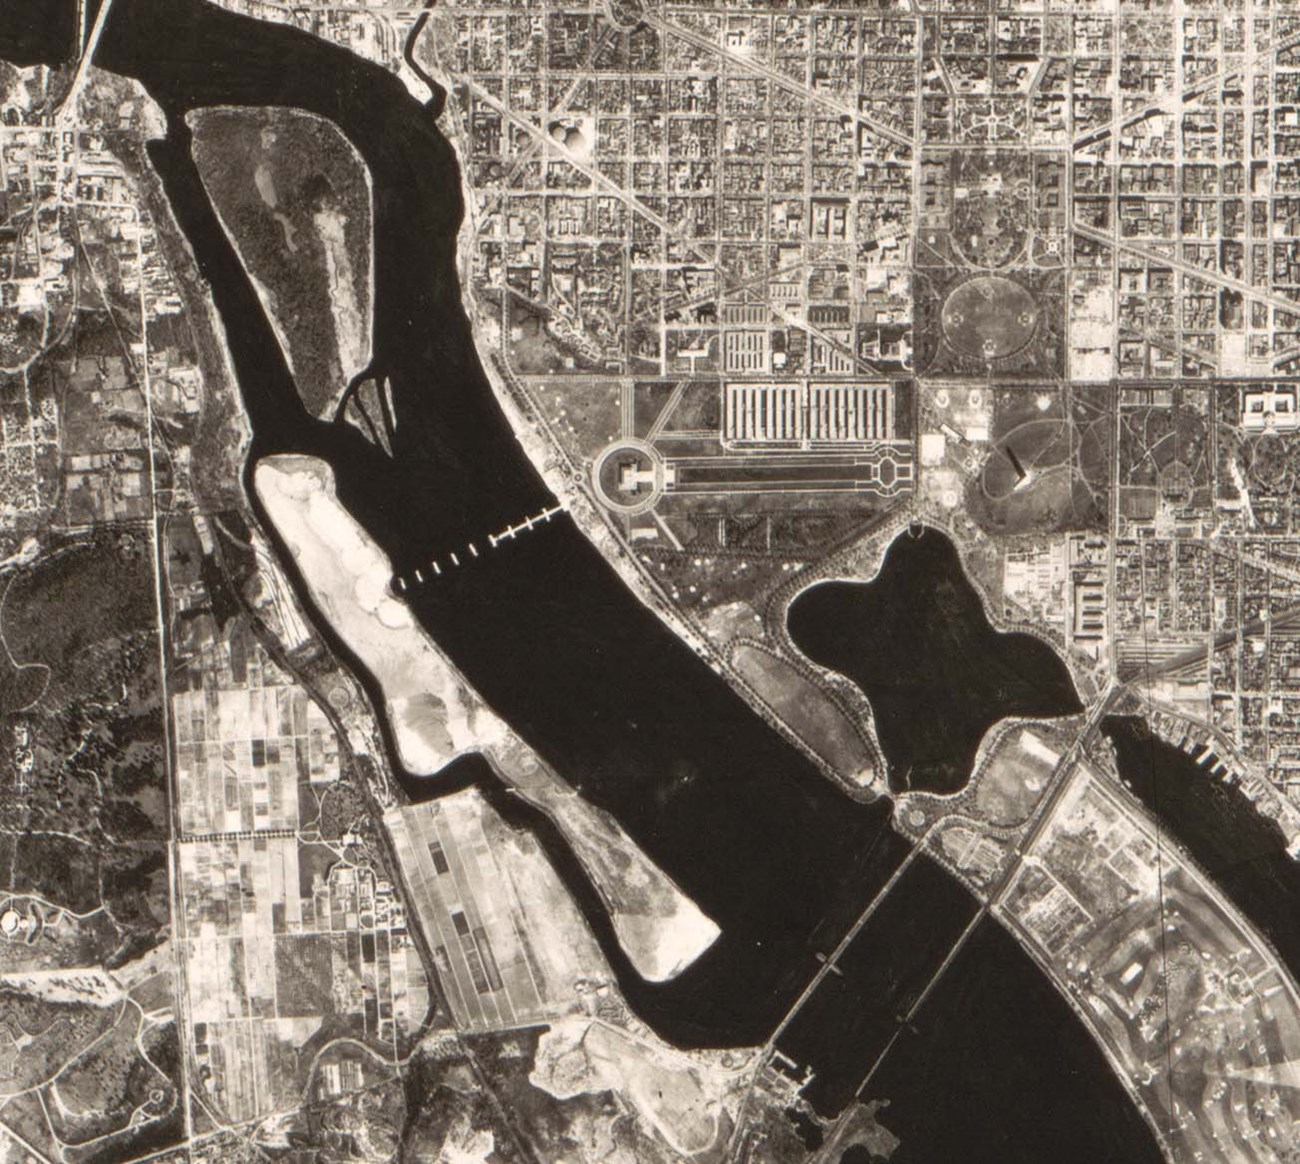 An aerial image of a section of Washington, DC including the elongated Columbia Island near the western shore of the Potomac River.